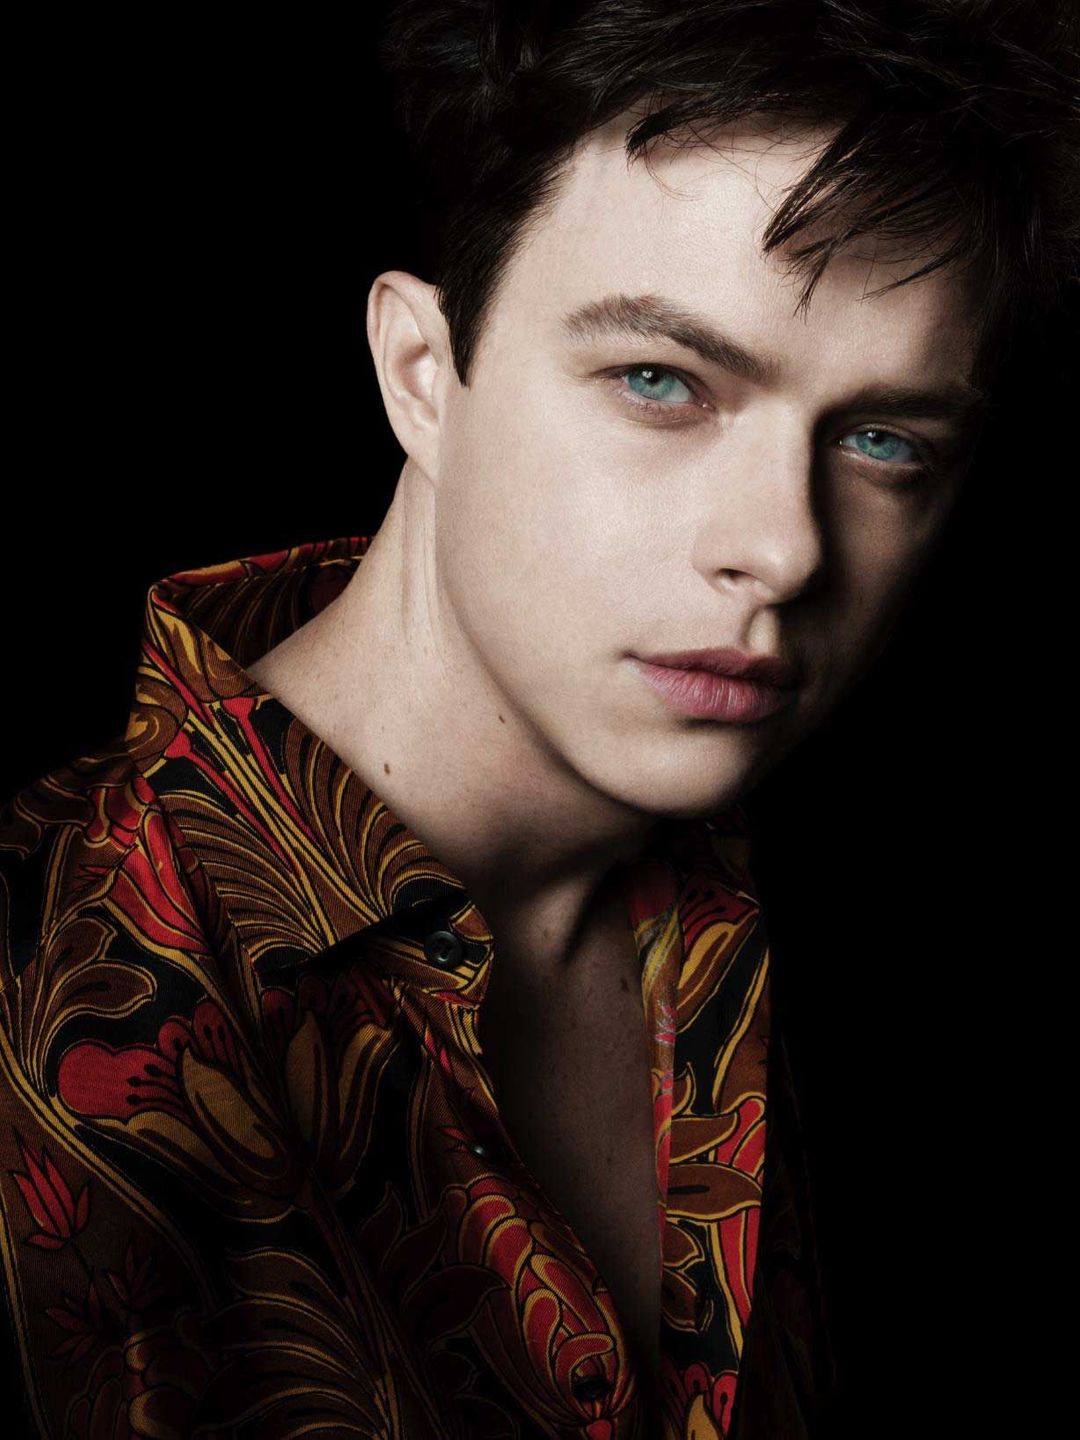 Dane DeHaan does he have a wife